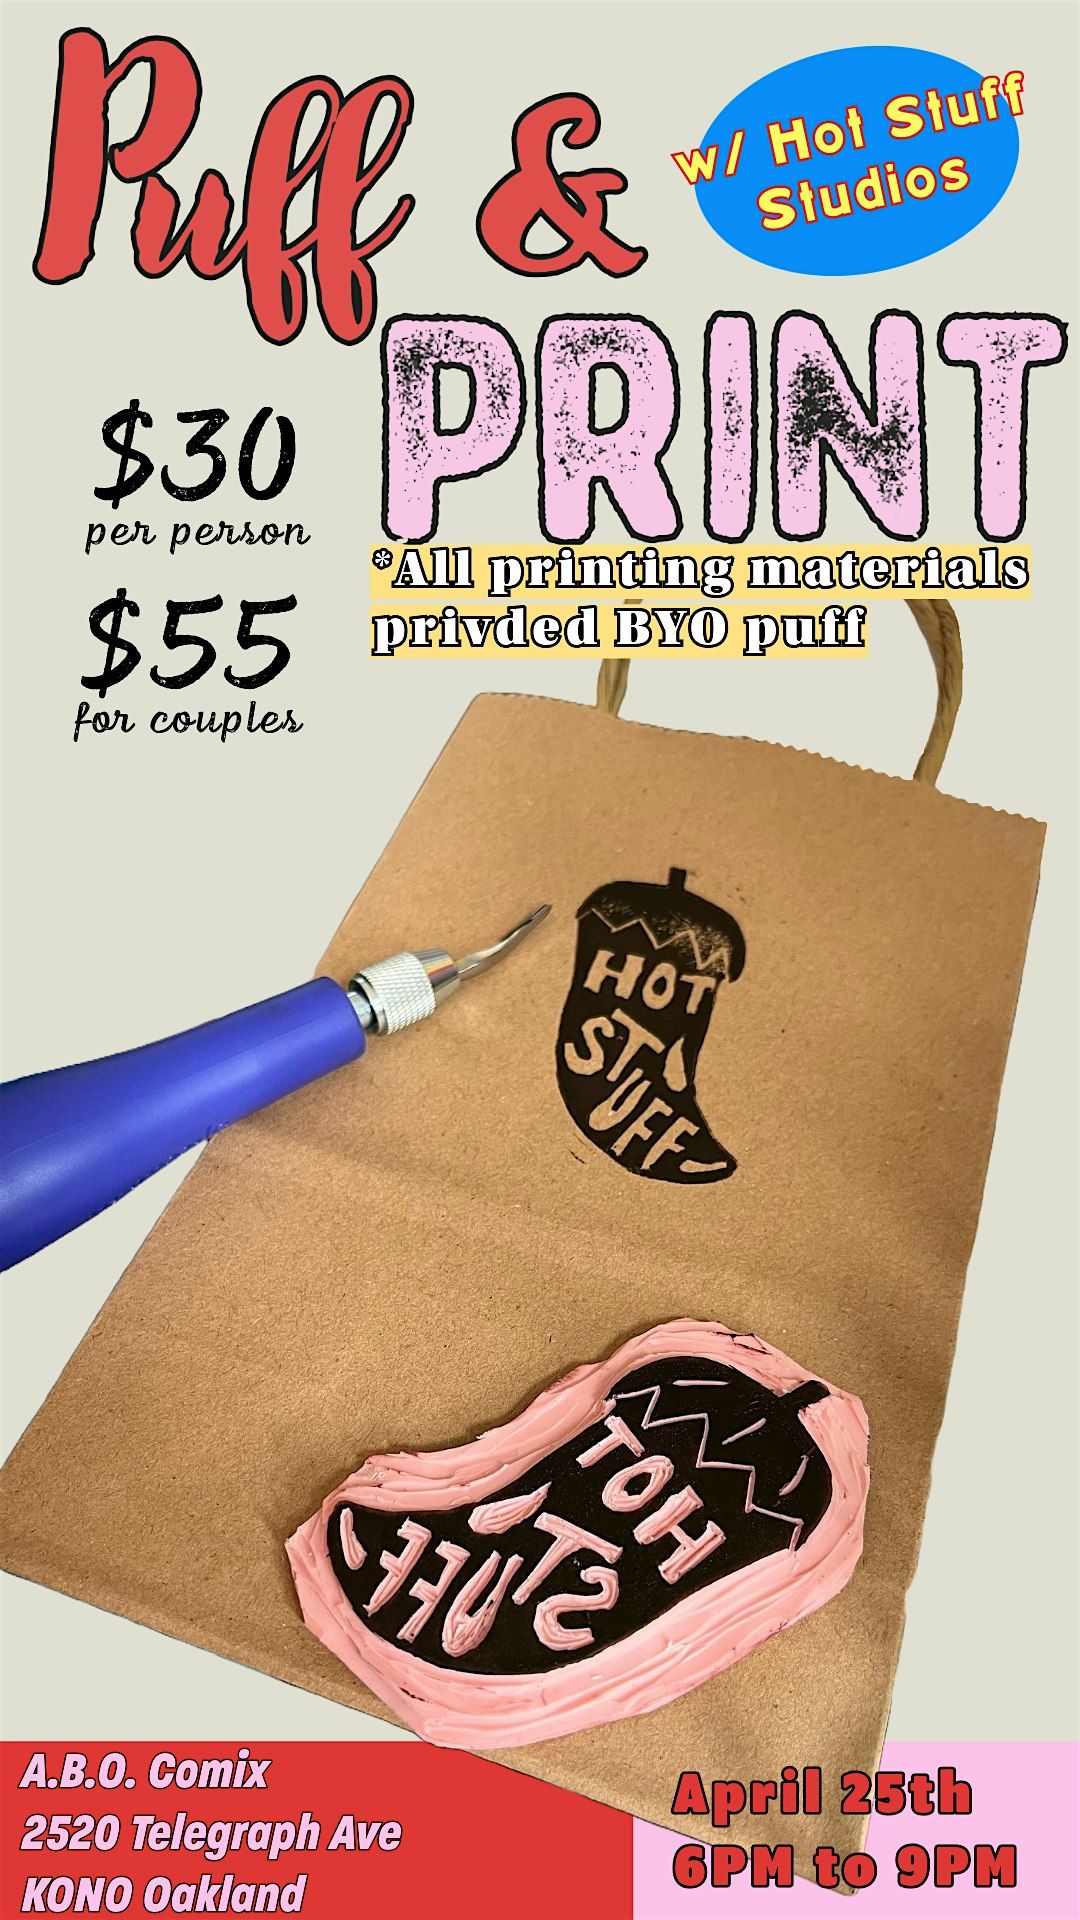 Puff and Print Workshop with Hot Stuff Studios!